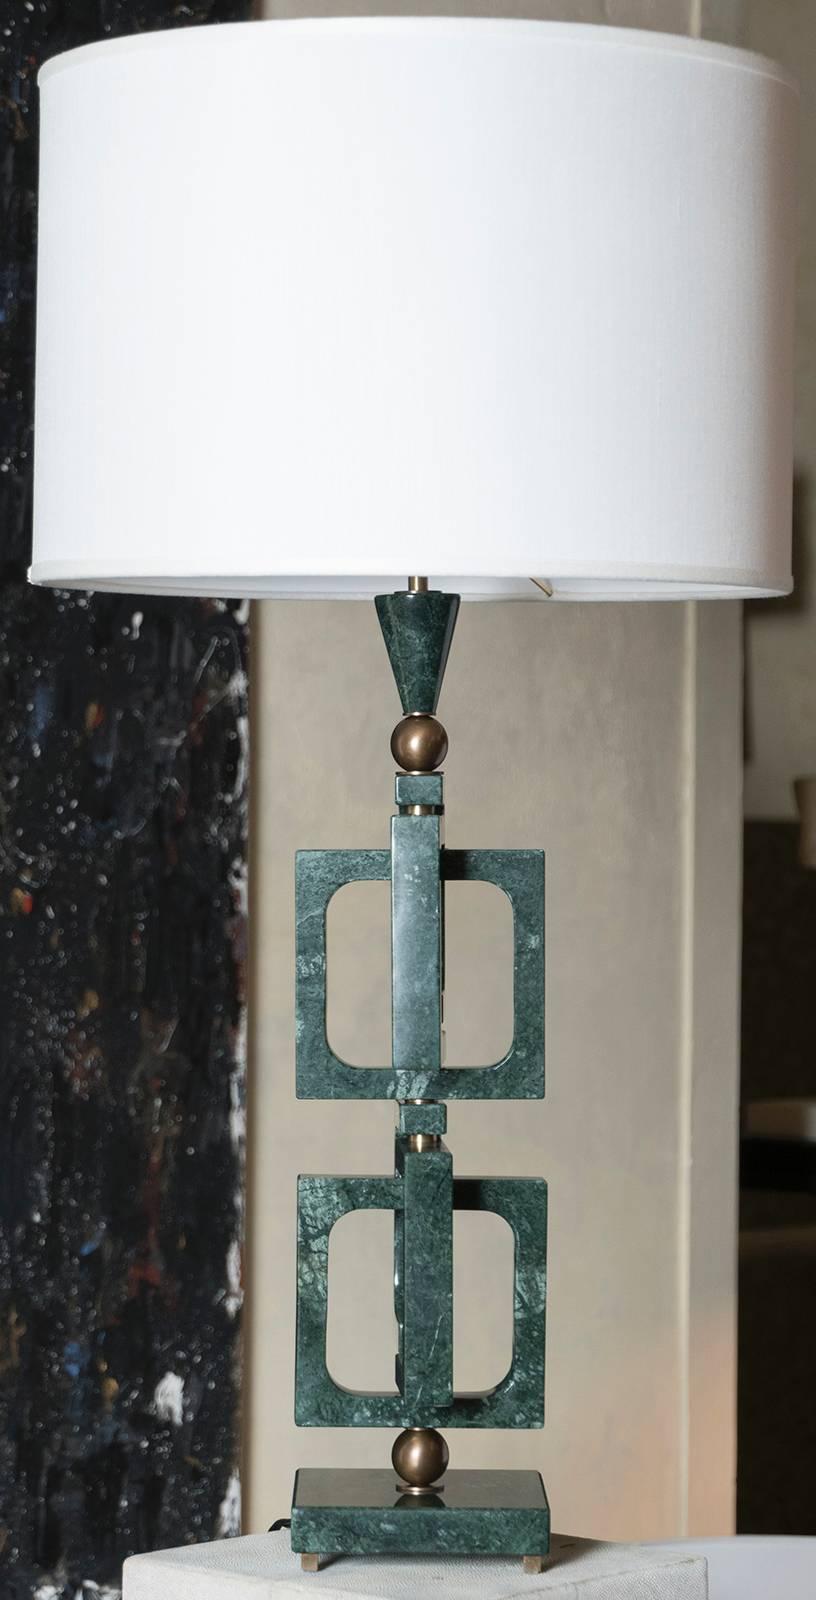 Sculptural lamp realized in Verde Guatemala marble with mat waxed finishing and with bronze details, also available in Nero Marquina marble and travertine stone, lampshade cm 45 x H 30, total high lampshade included cm 89.